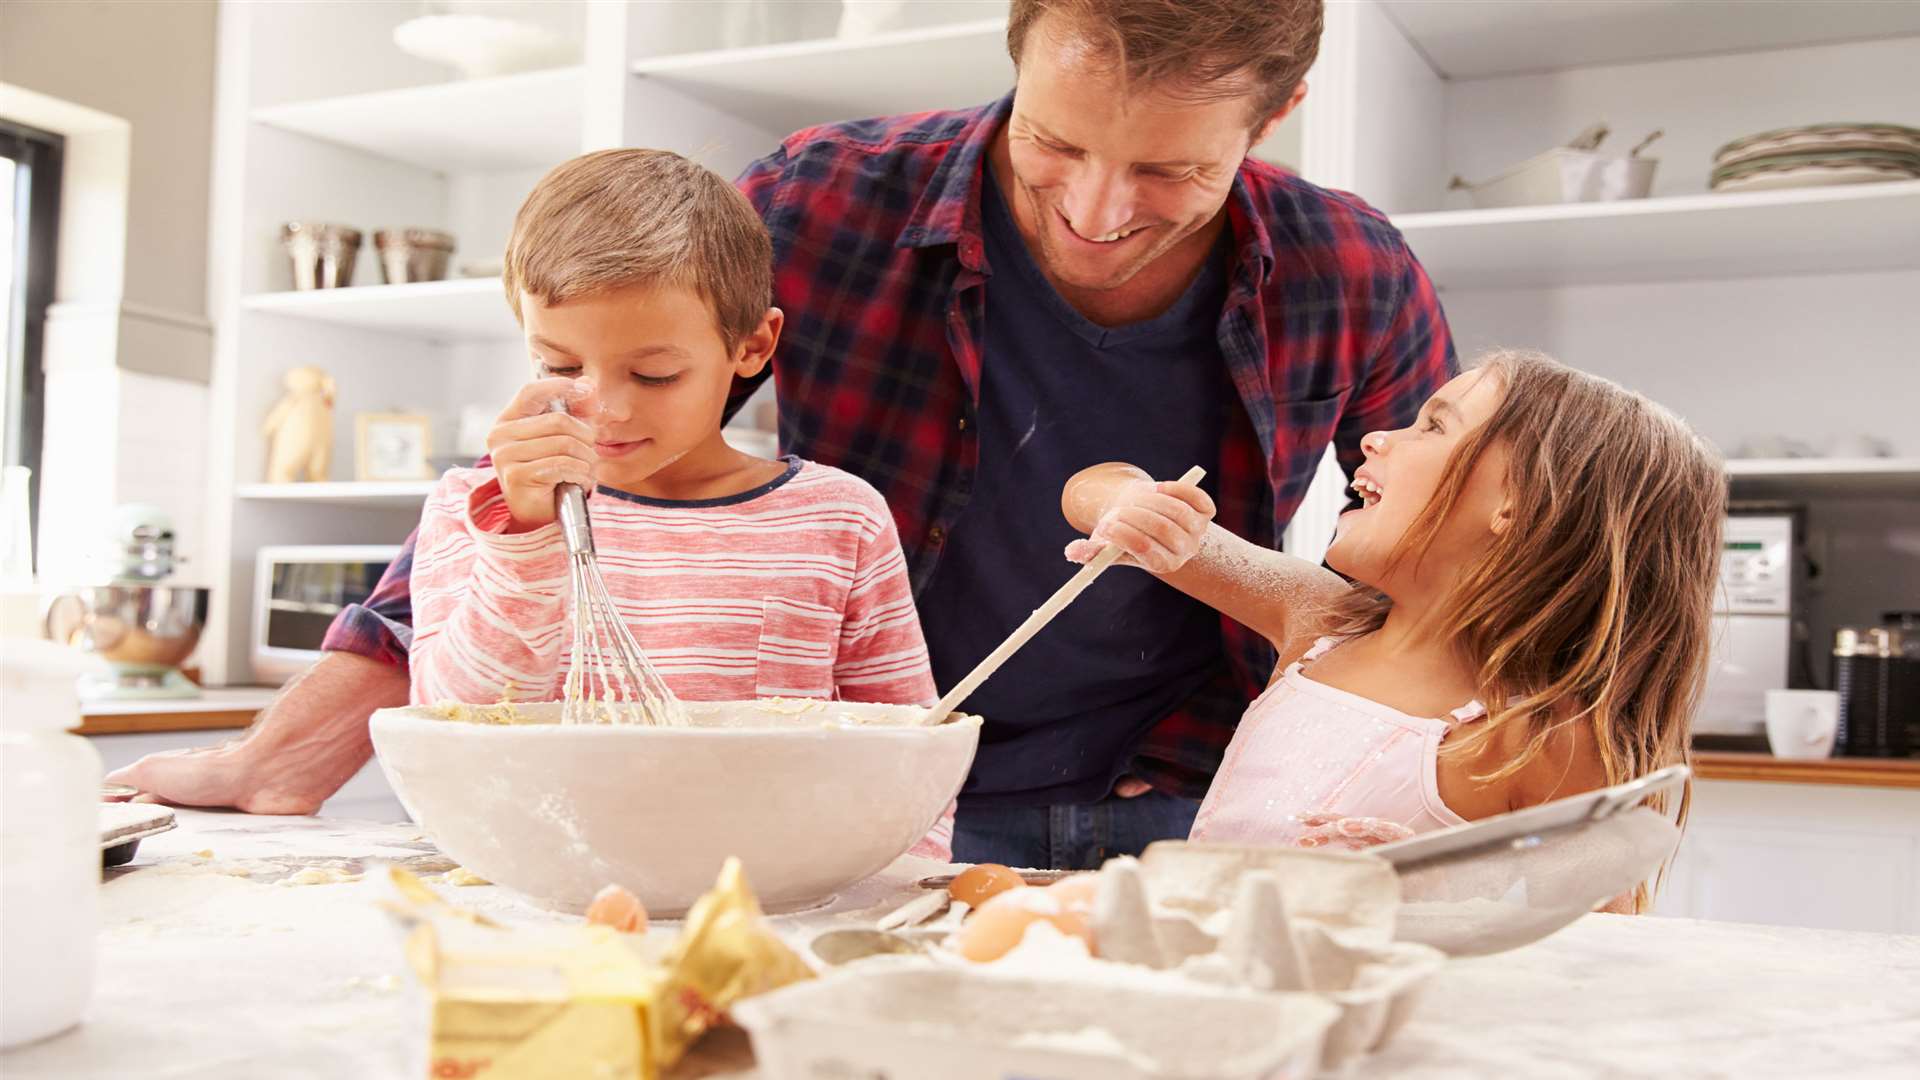 It's not just mums, dads should get involved in the kitchen with the kids too